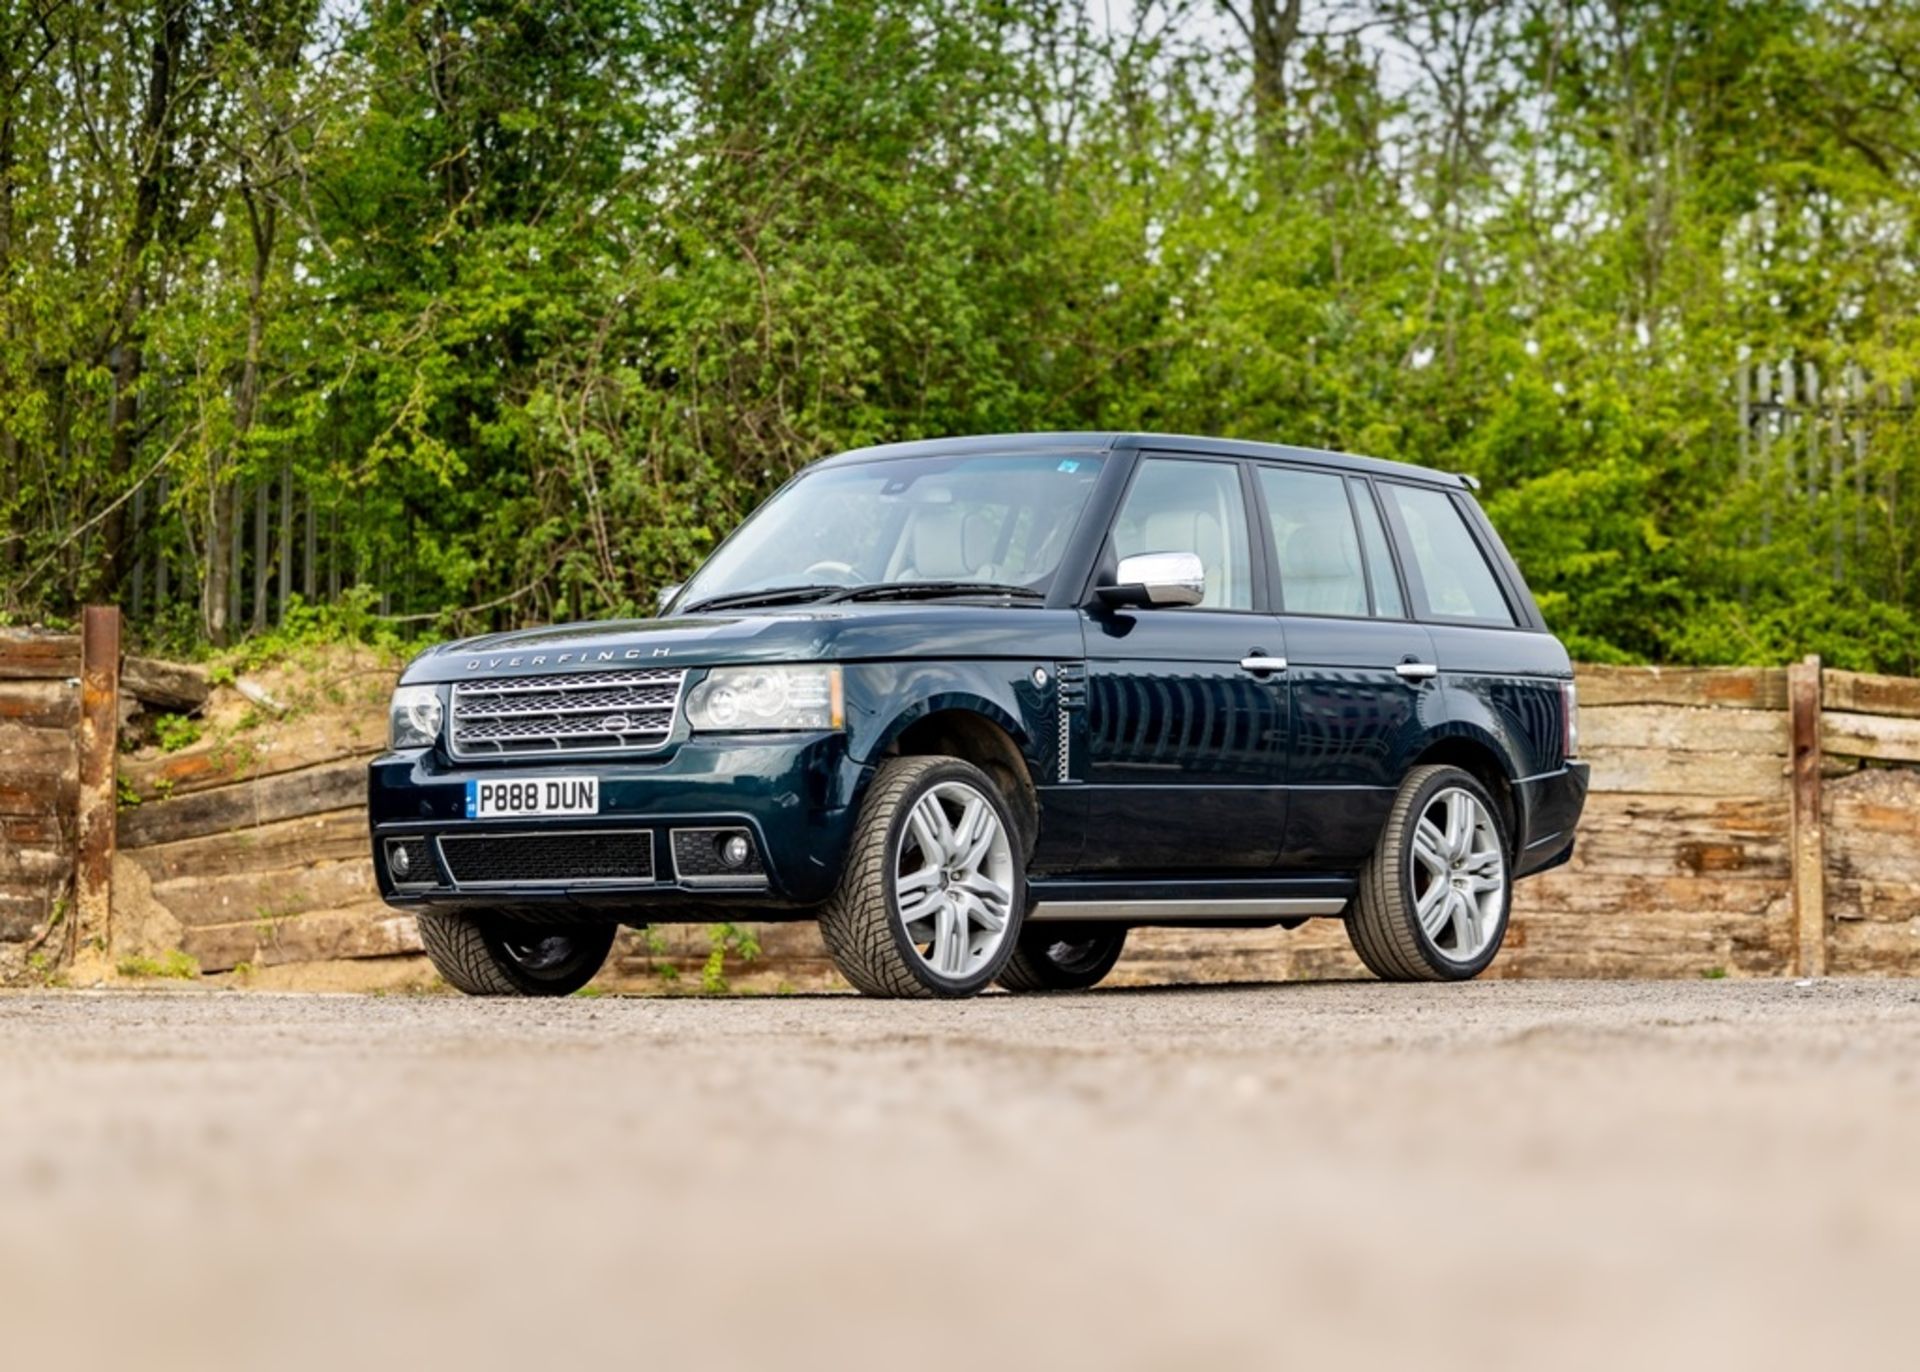 2009 Range Rover L322 Holland & Holland 5.0 Supercharged